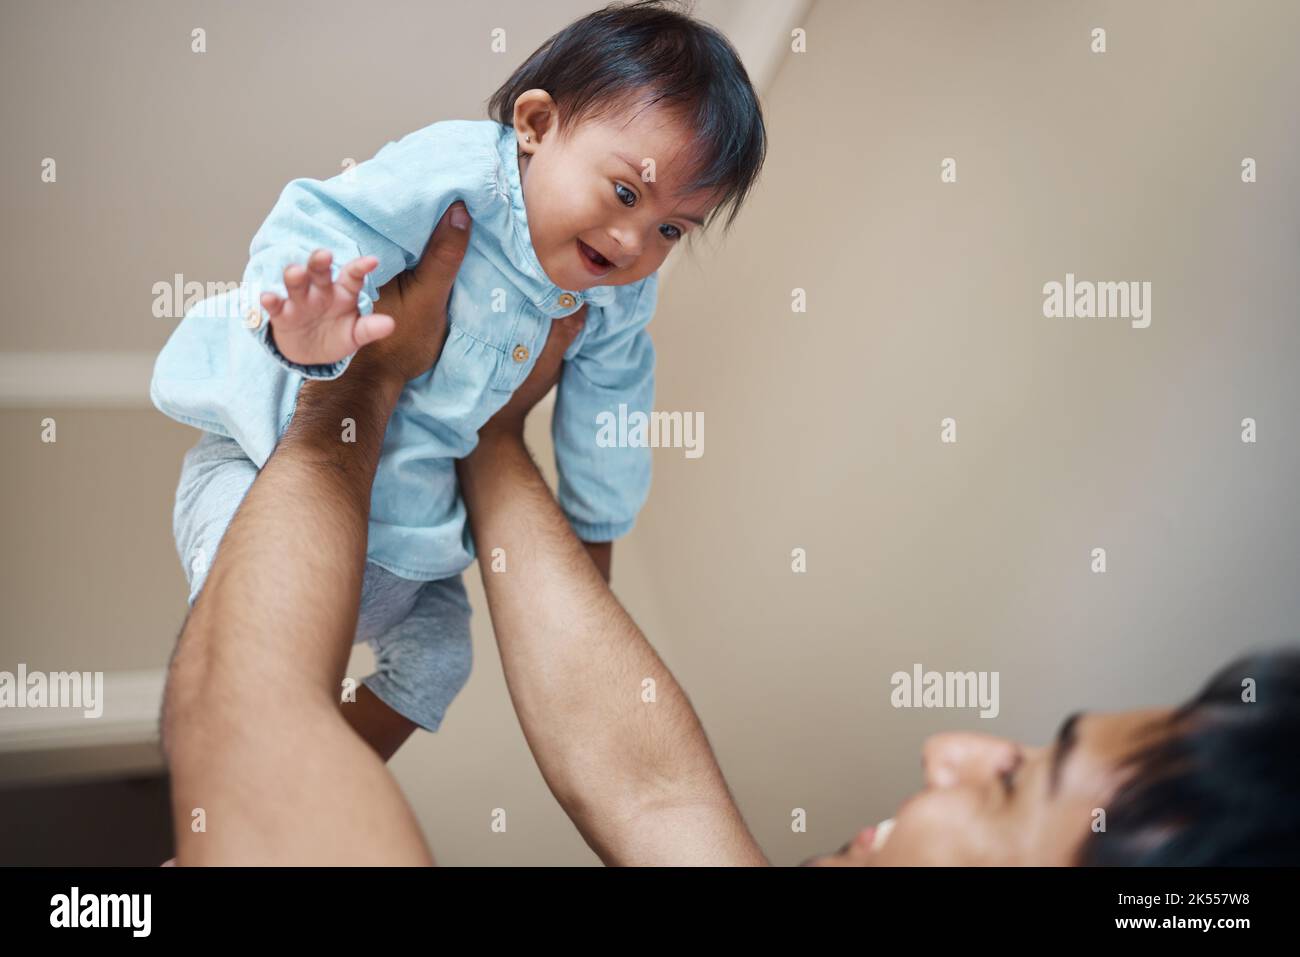 Down syndrome, baby and father with love for child, smile for care and happiness in their house. Newborn kid with disorder or condition happy, playing Stock Photo